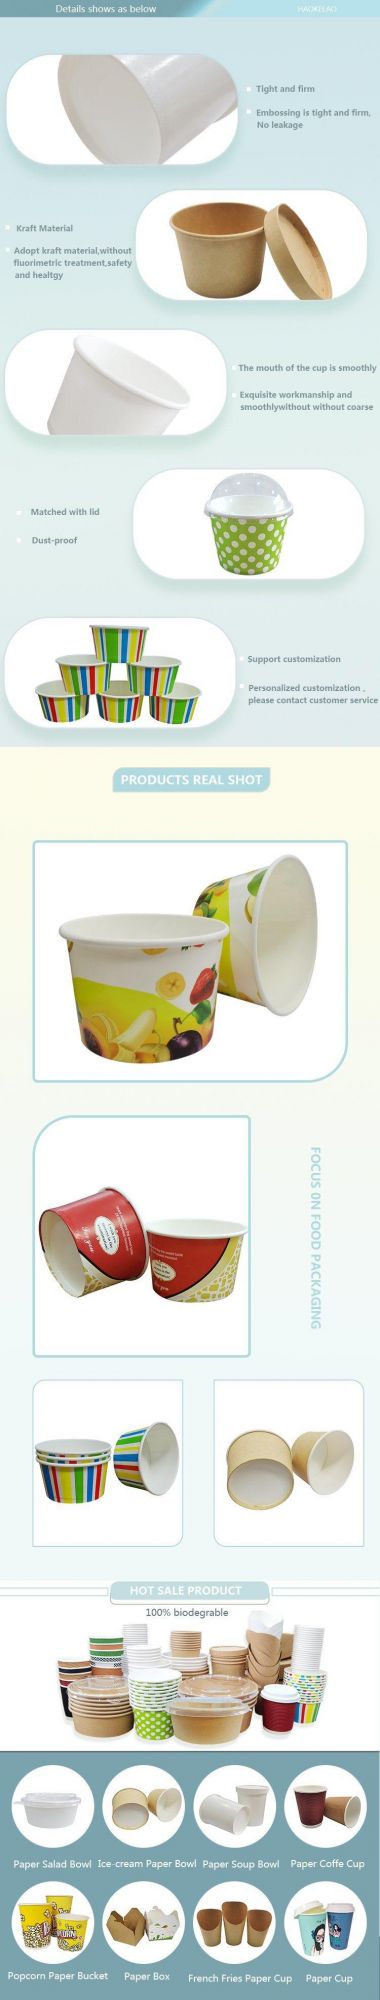 Disposable Ice Cream Cups Custom Logo Dessert Bowls Printed Paper Packaging with Lid Spoon and Dome Lid